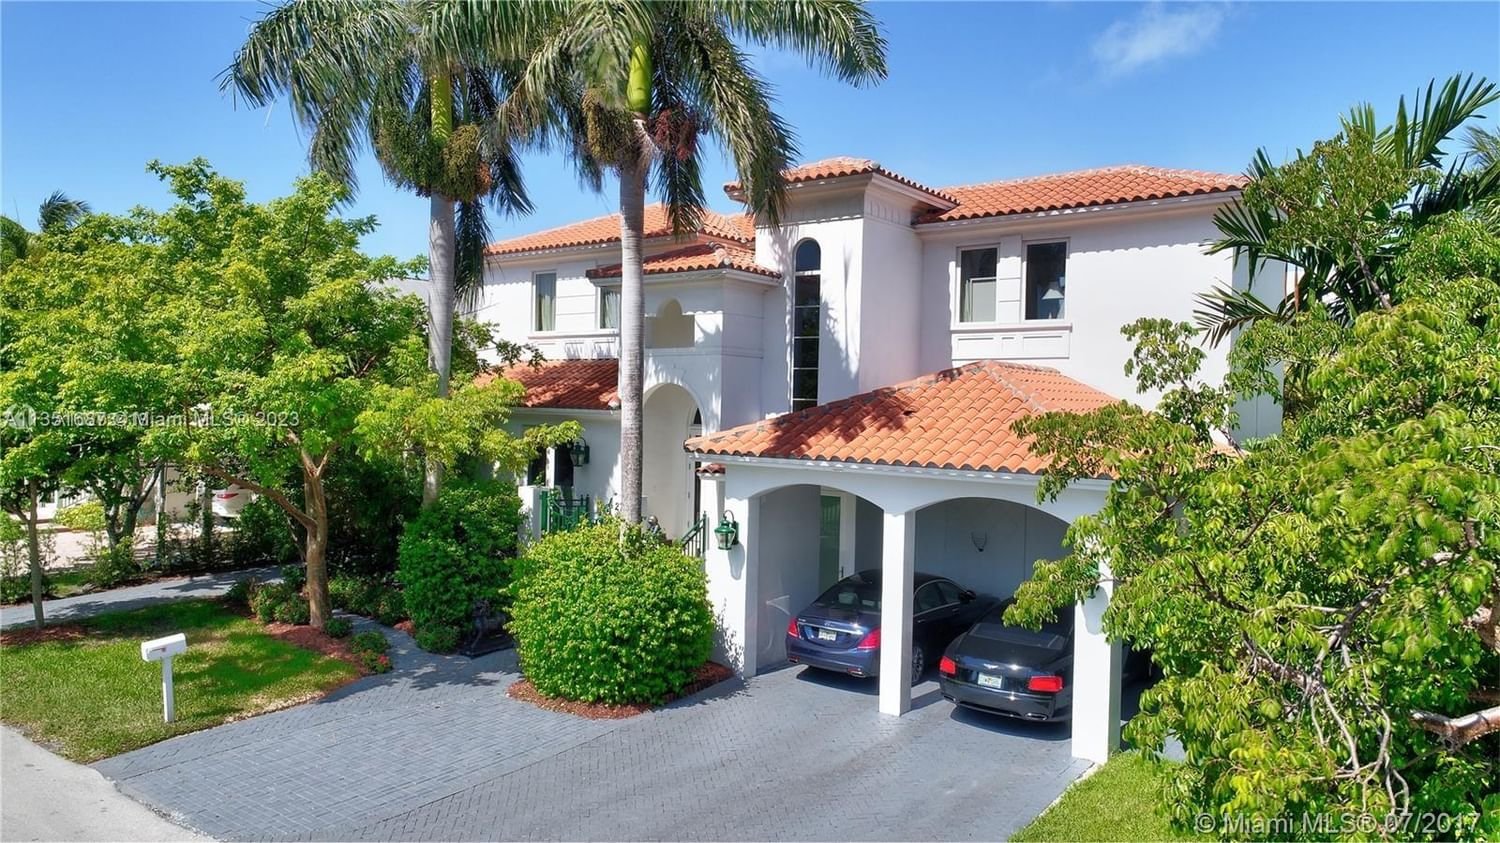 Real estate property located at 270 Ridgewood Rd, Miami-Dade County, Key Biscayne, FL